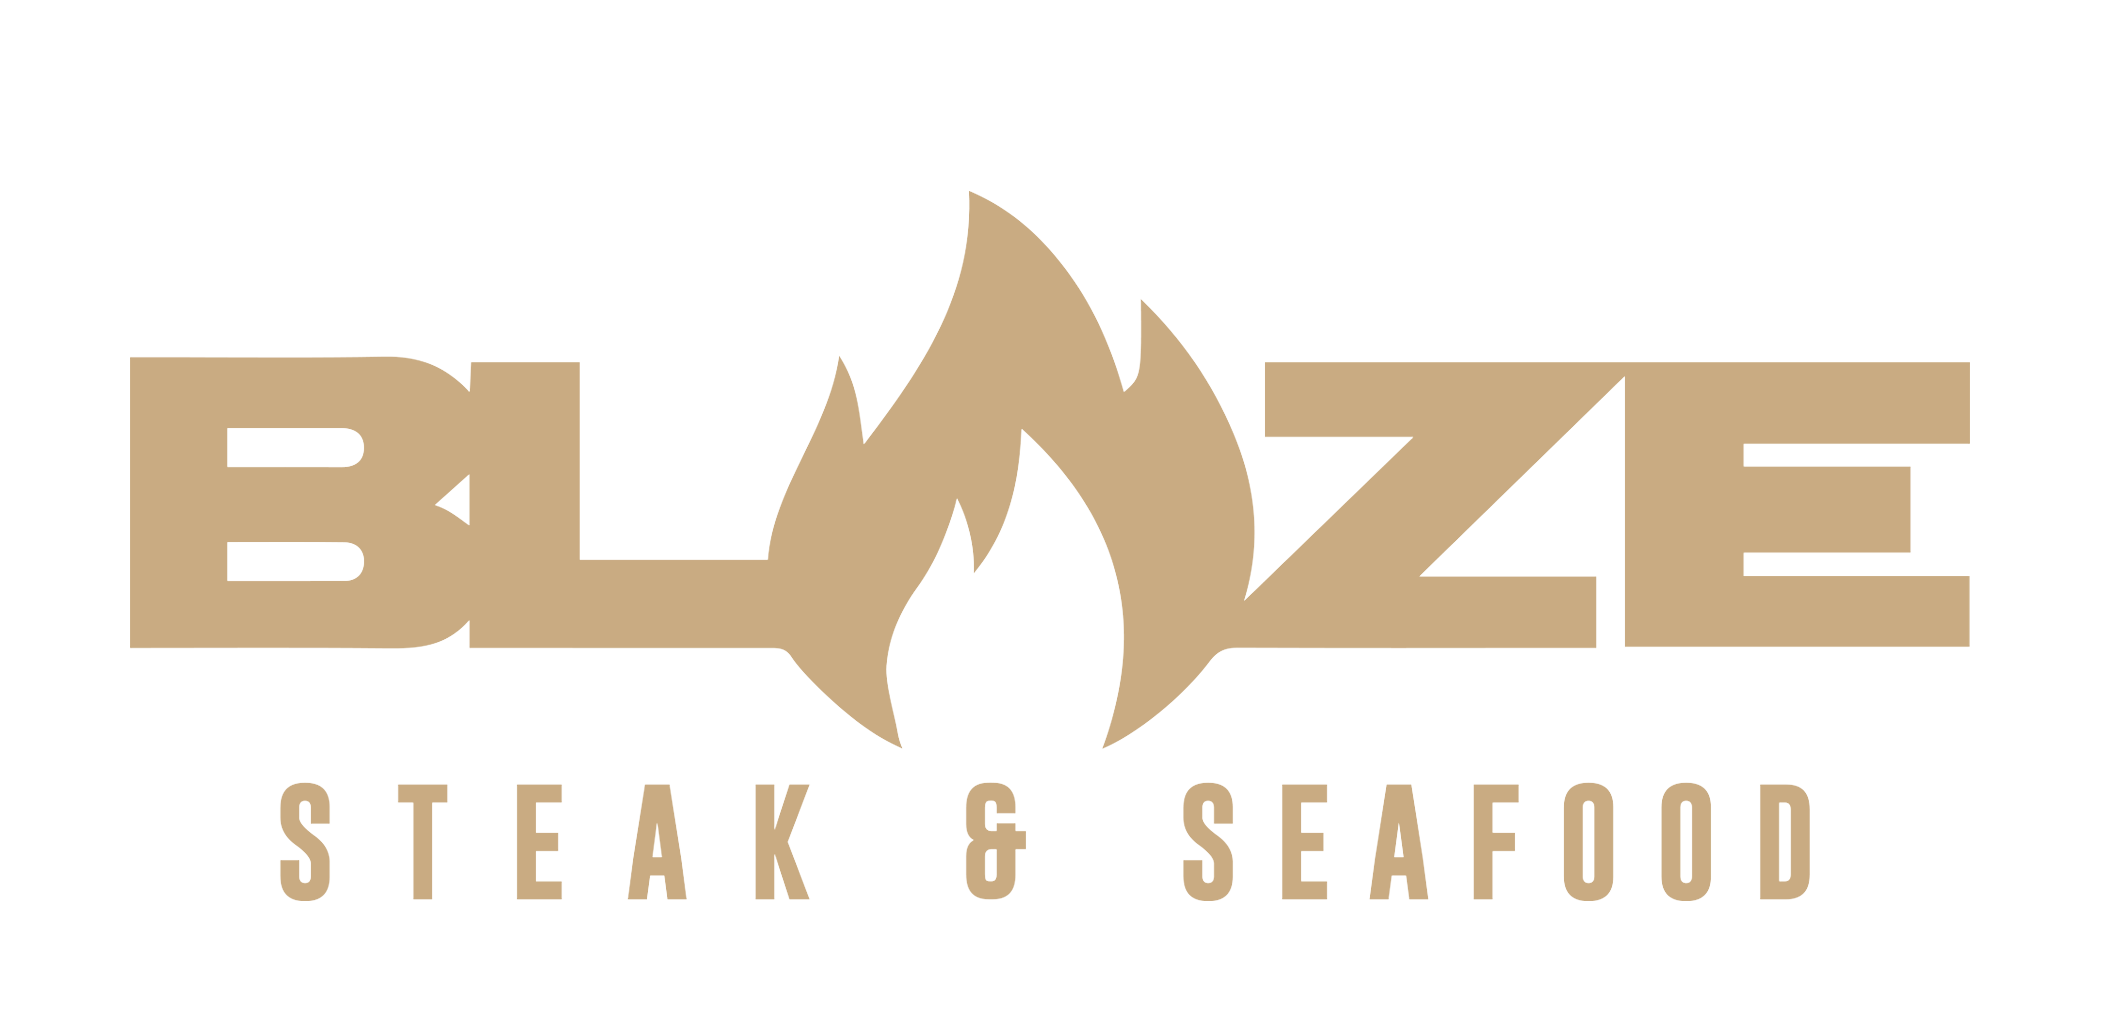 Employee at Kandi Burruss’ Blaze Steak and Seafood Restaurant Arrested After Shooting Co-Worker at Georgia Business